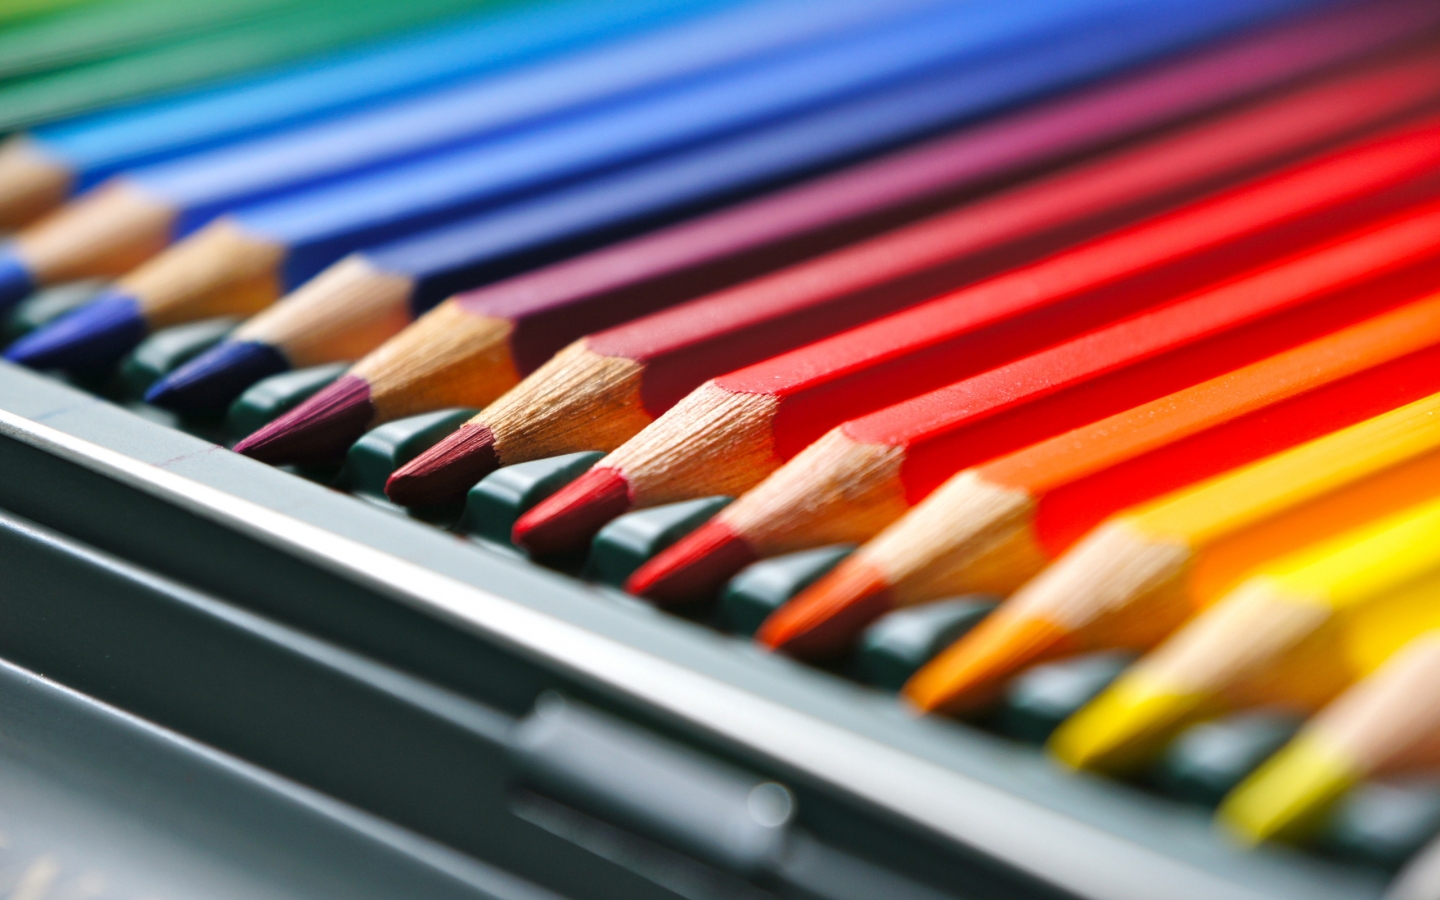 Crayons for 1440 x 900 widescreen resolution